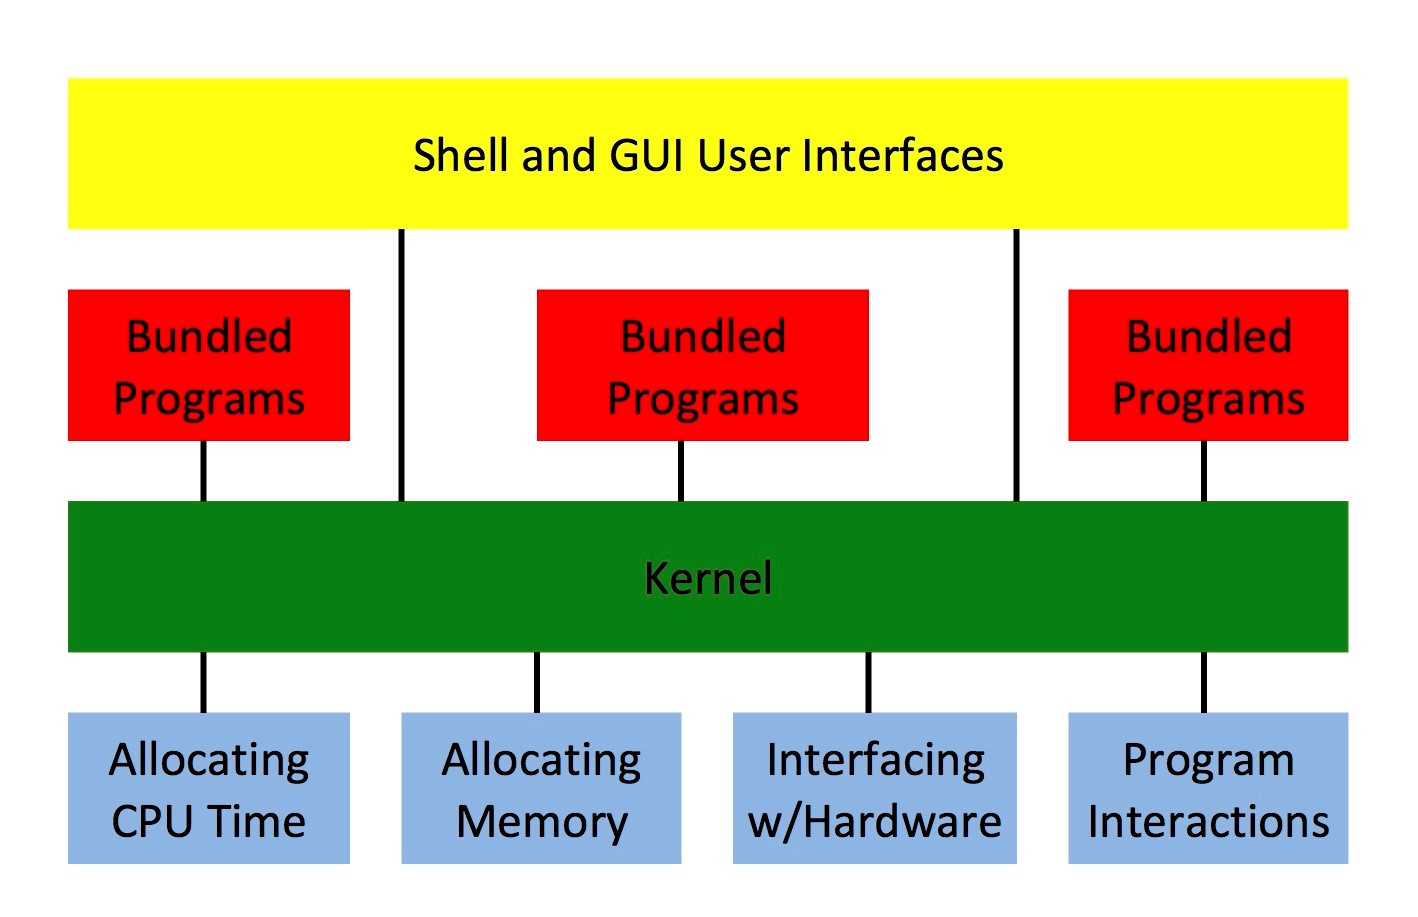 Image demonstrating the foundations of computer hardware, including 1) central processing unit time; 2) memory usage; 3) interfacing with peripheral hardware; and 4) program interactions. The kernel is the bottom of the operating system pyramid controlling interactions with this hardware. Bundled programs that come with the operating system are used to interact with the kernel, while shell and graphical user interfaces provide human interaction with the kernel and with computer programs.